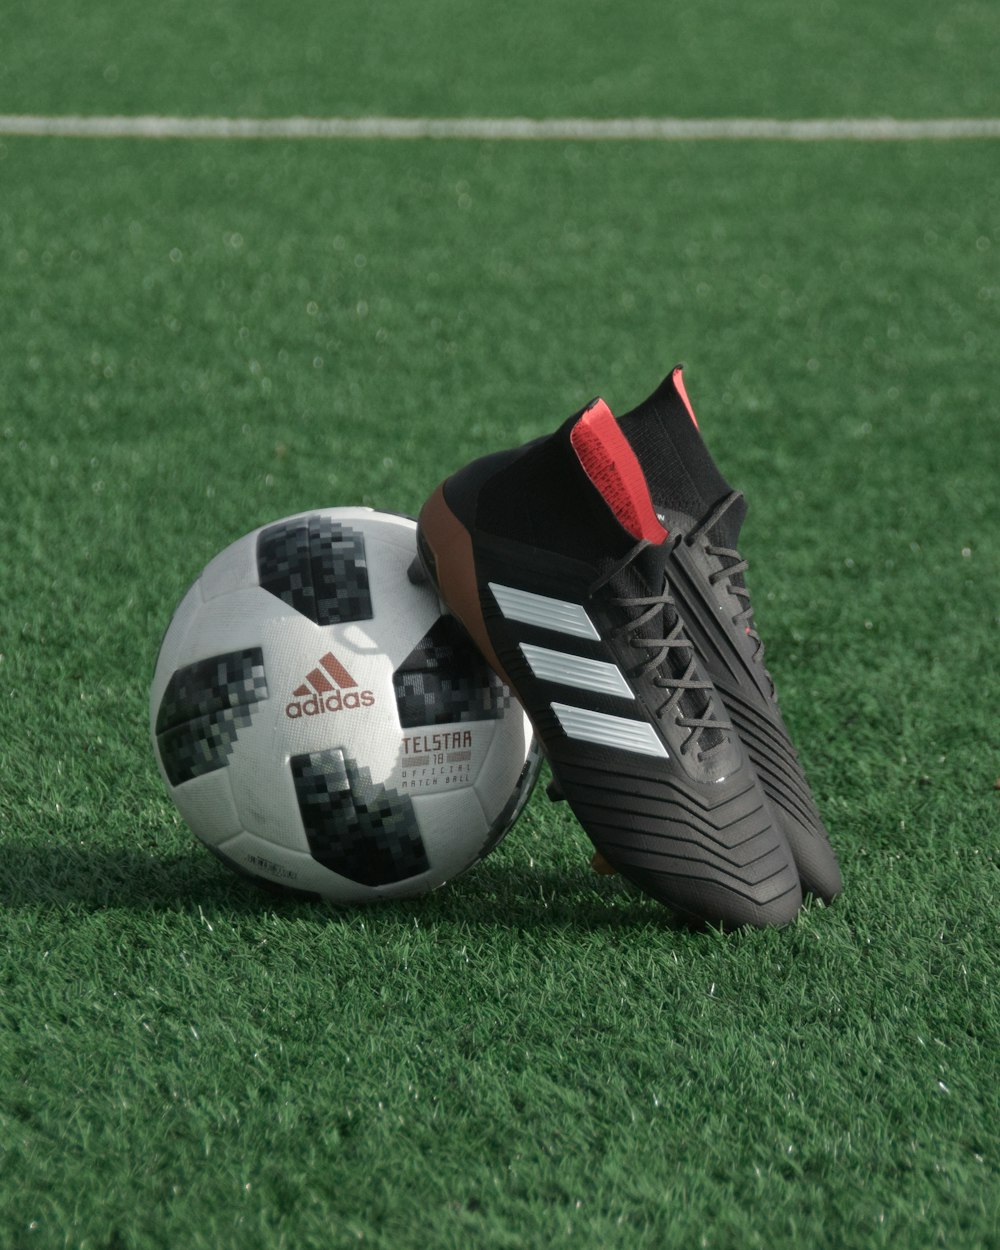 black adidas cleats lean on white and black adidas soccer ball on green  grass photo – Free Texture Image on Unsplash